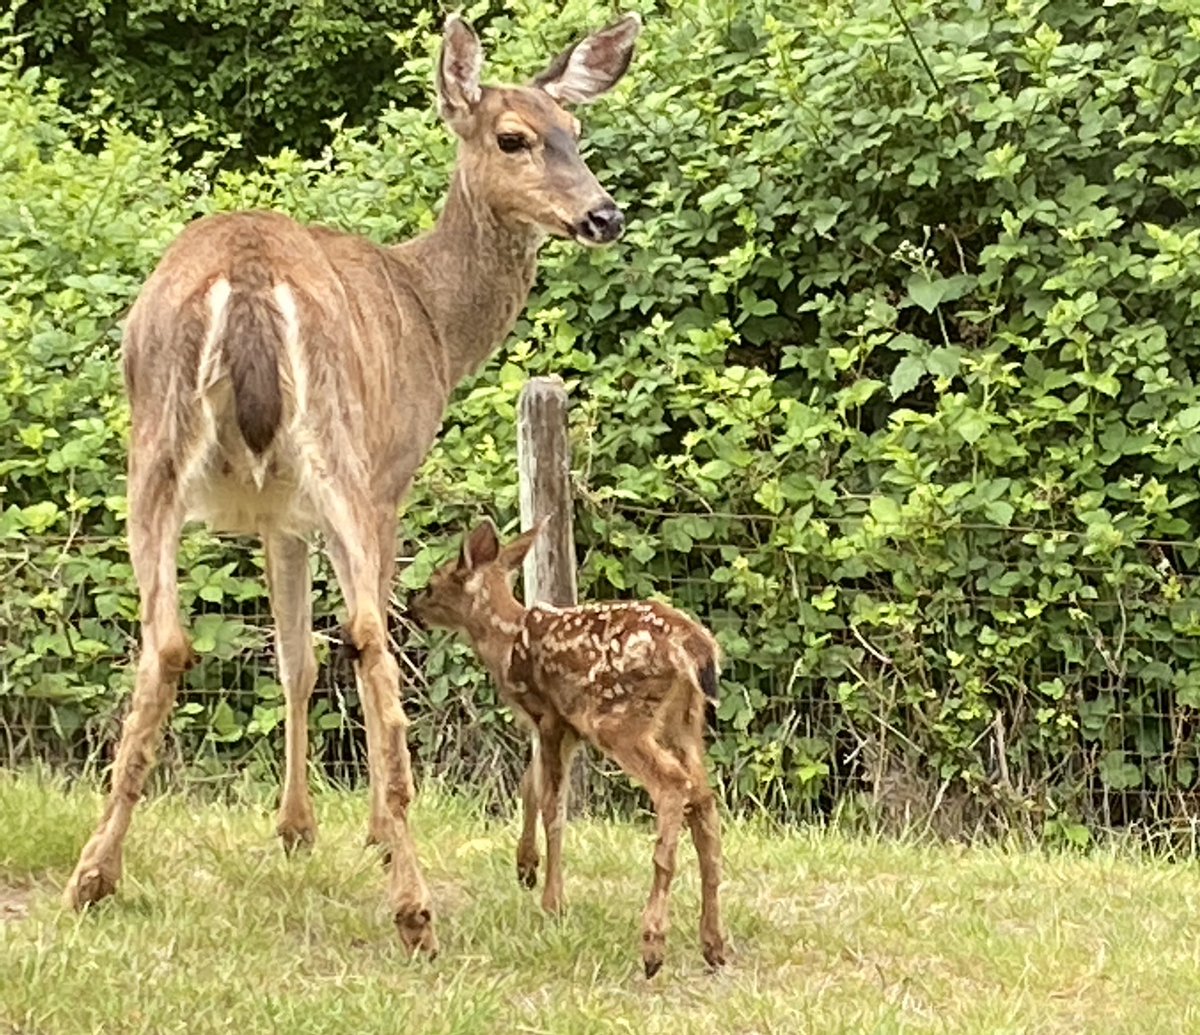 BABY TIME!!!🦌🦌
Sweetie and her new twins 🎉
#twins #deer #pnw #wildlife #SoNorthwest